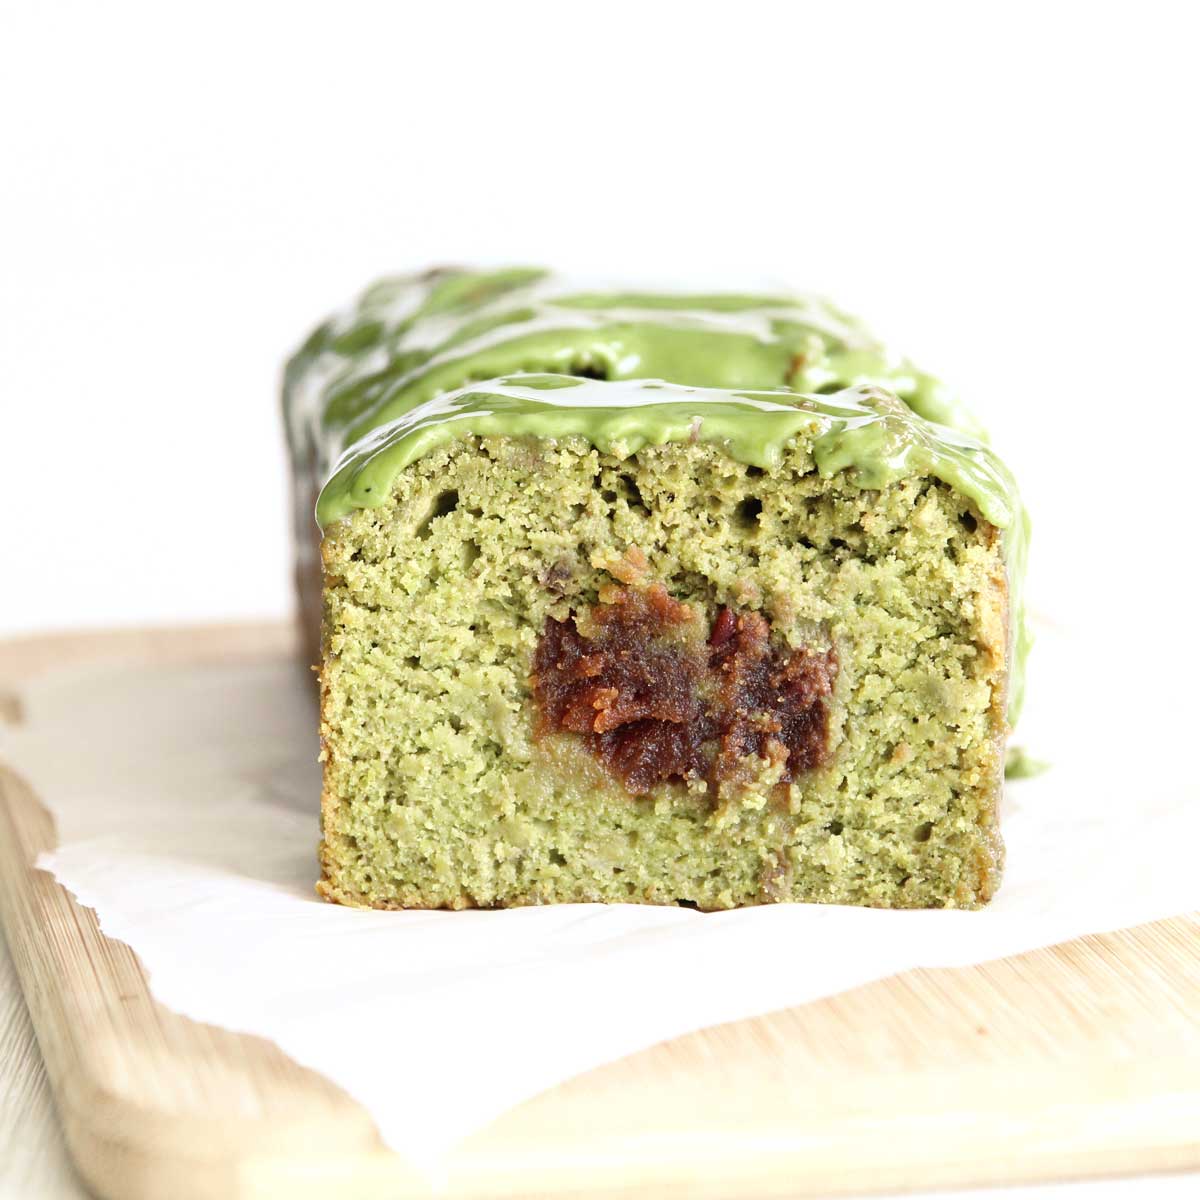 How to Make Matcha Banana Bread with Red Bean Paste Filling - Frosting